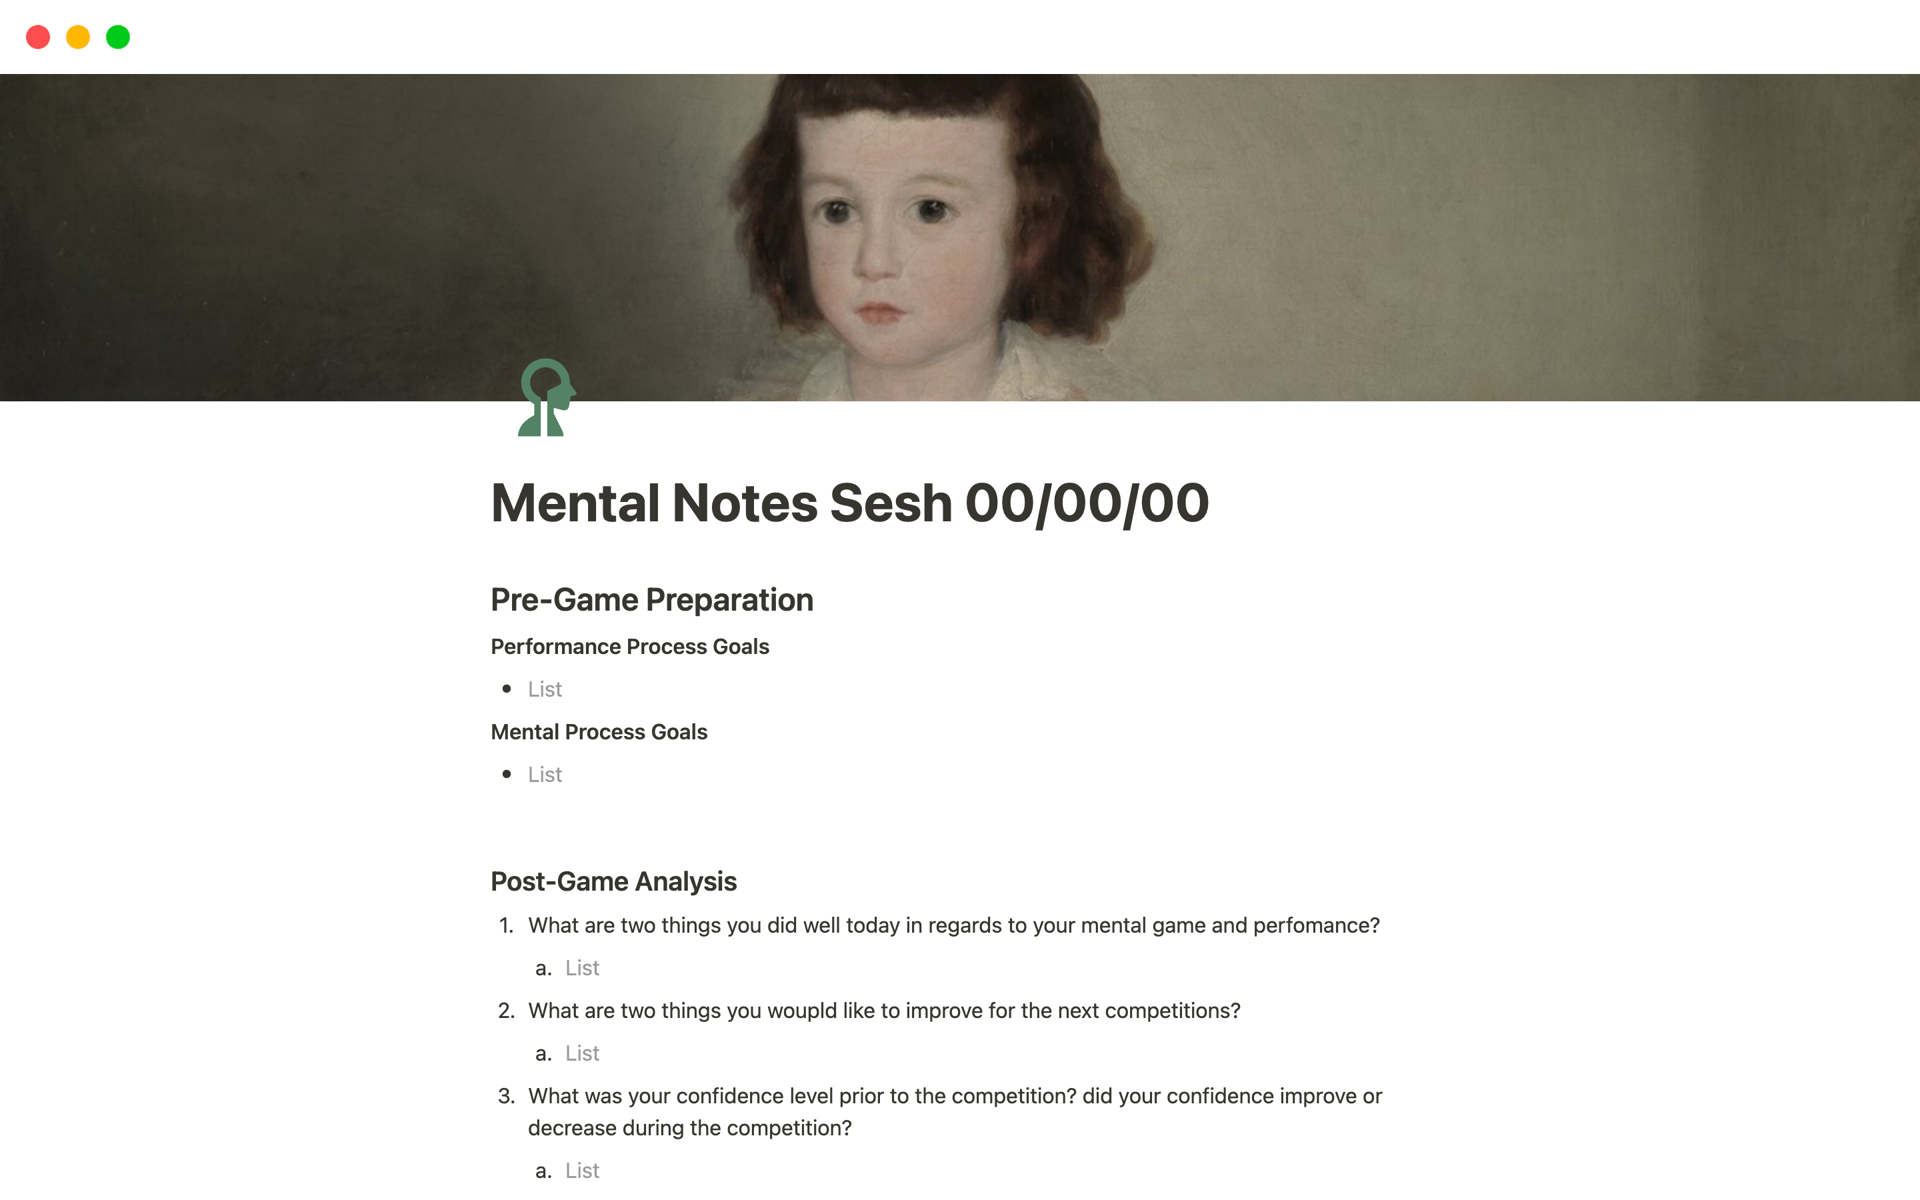 Frisbee mental notes template for season